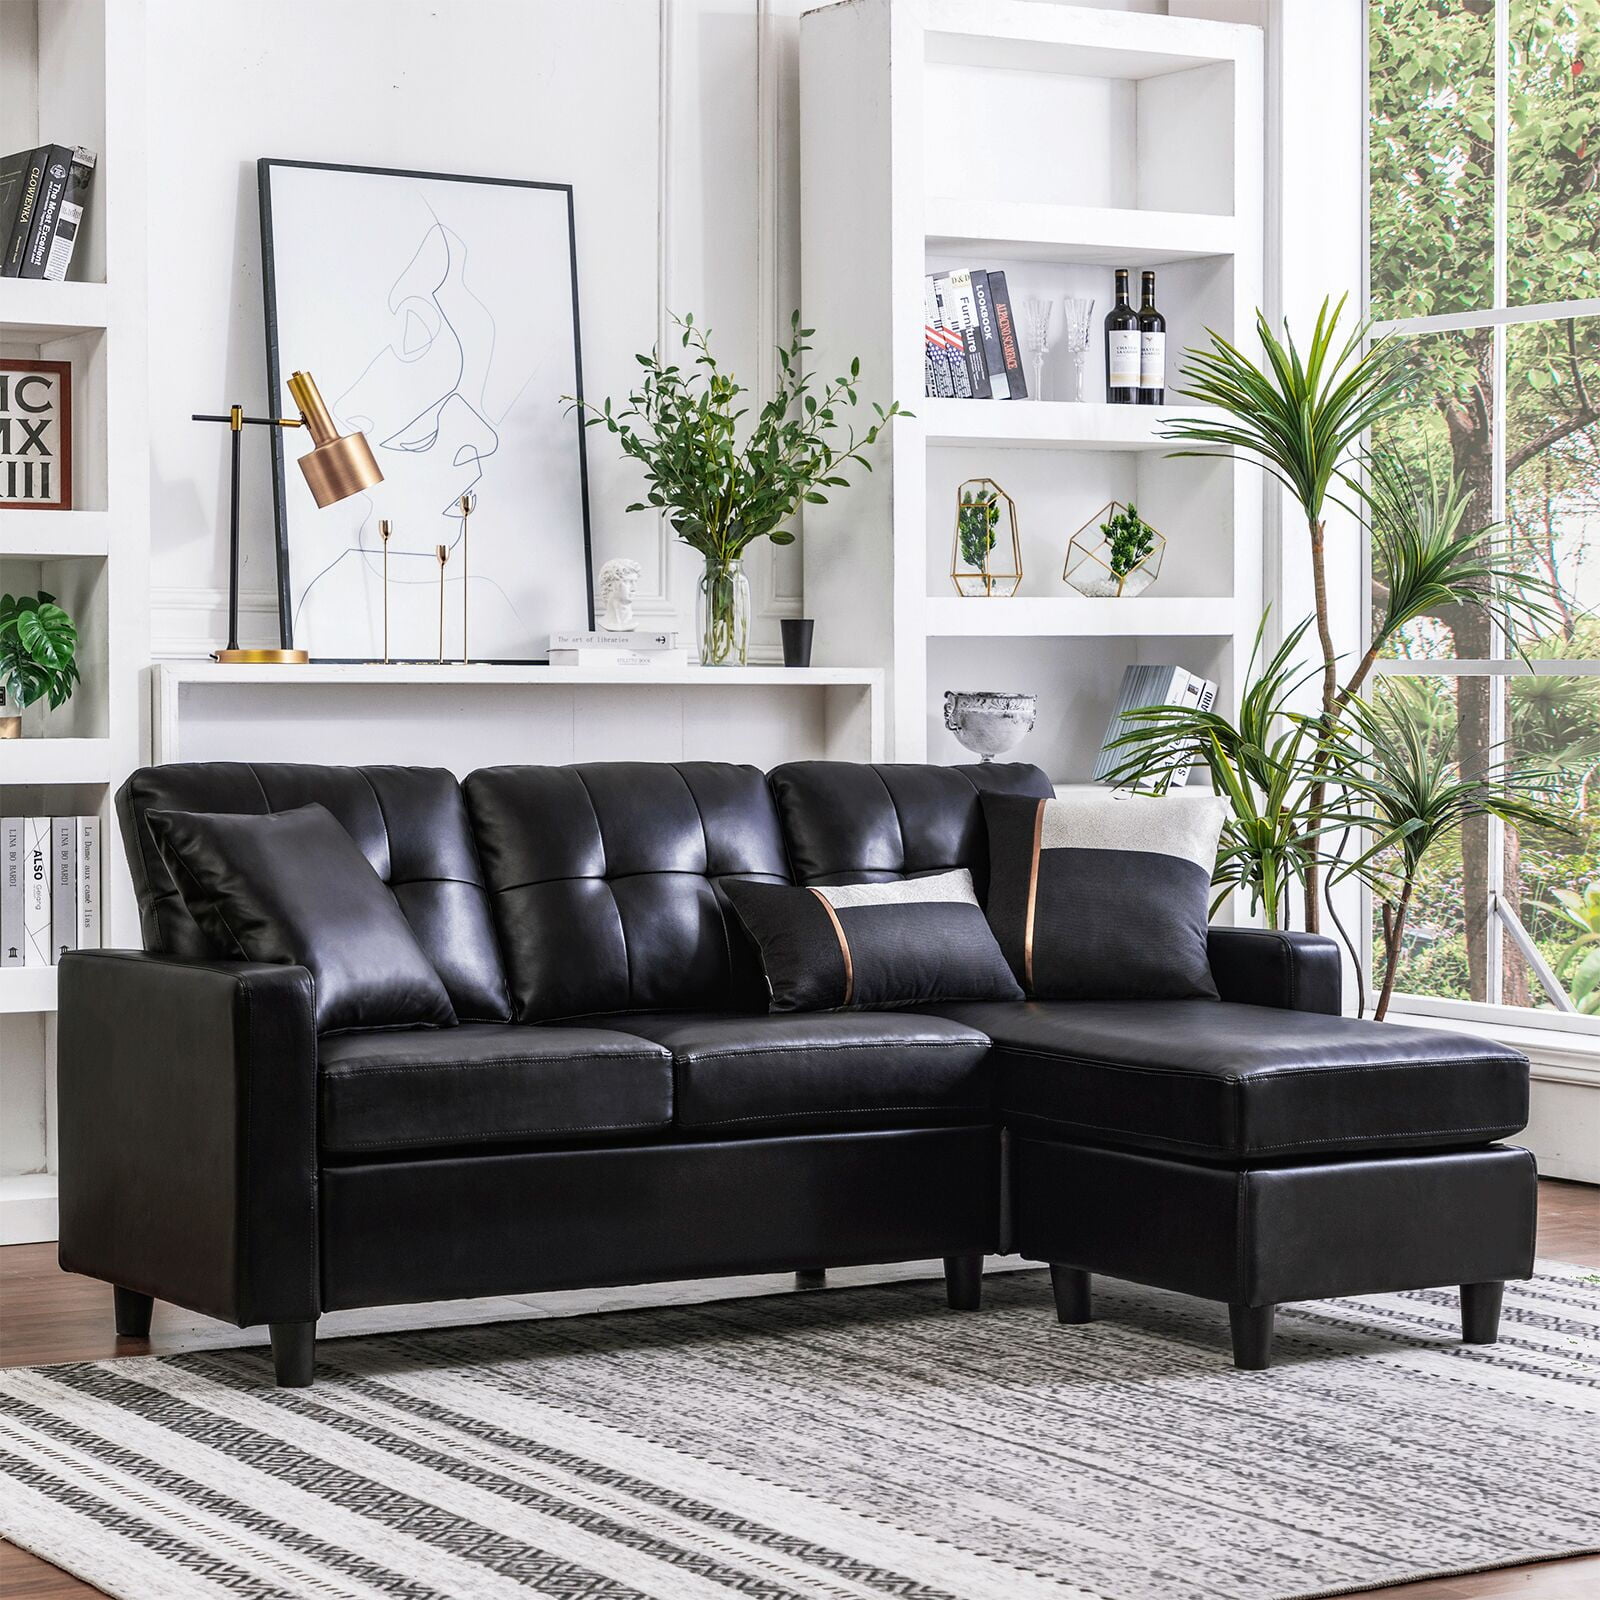 Honbay Faux Leather Sectional Sofa L, Black Leather L Shaped Sectional